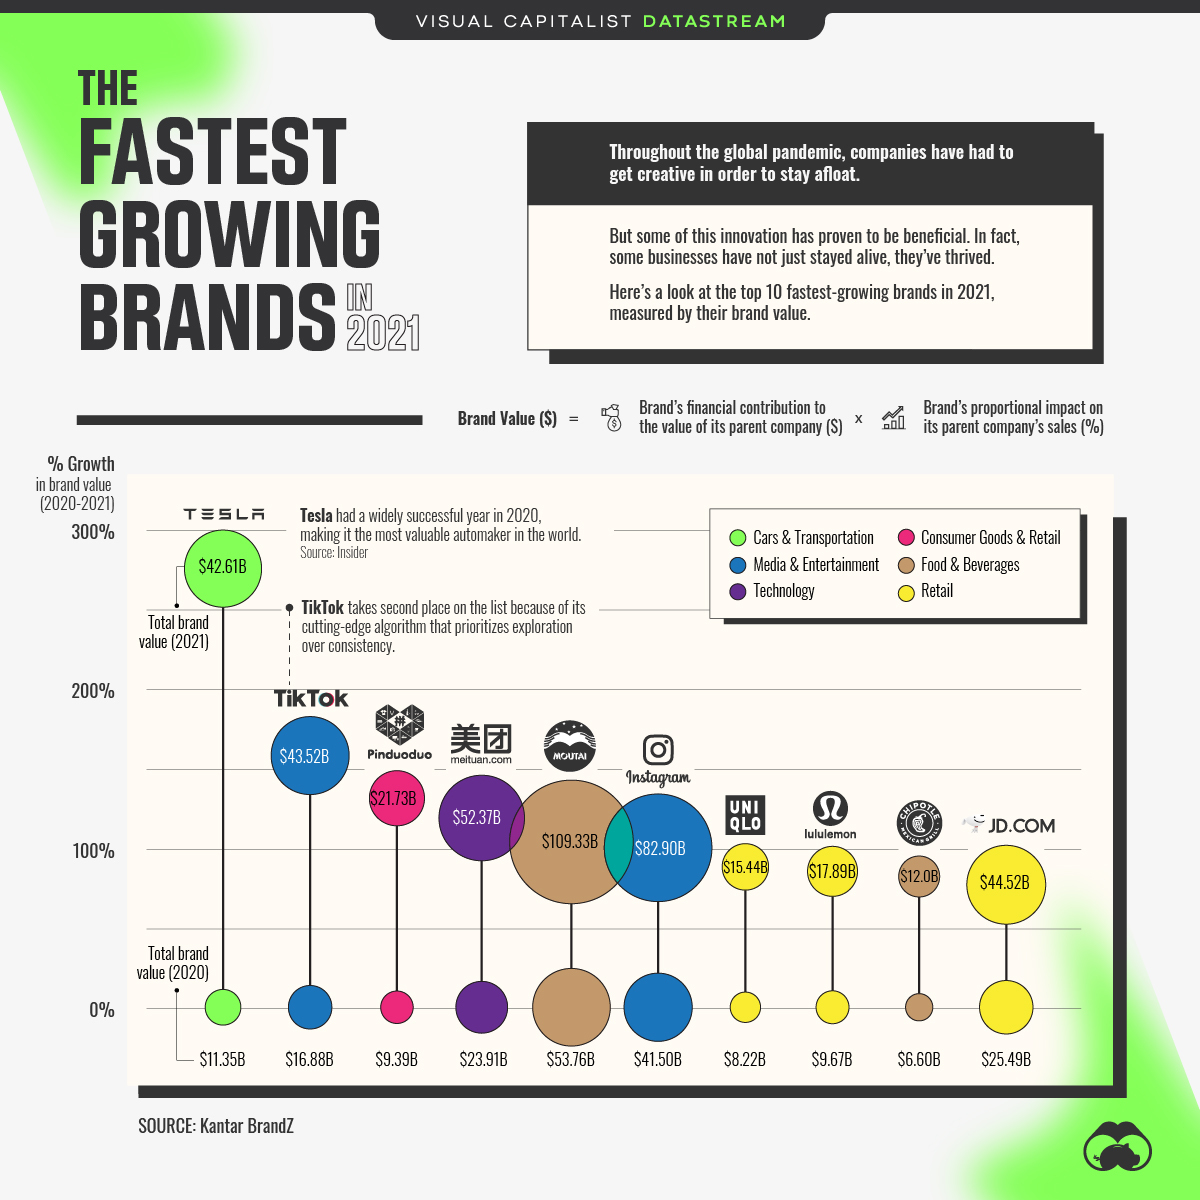 Ranked The World's Fastest Growing Brands in 2021